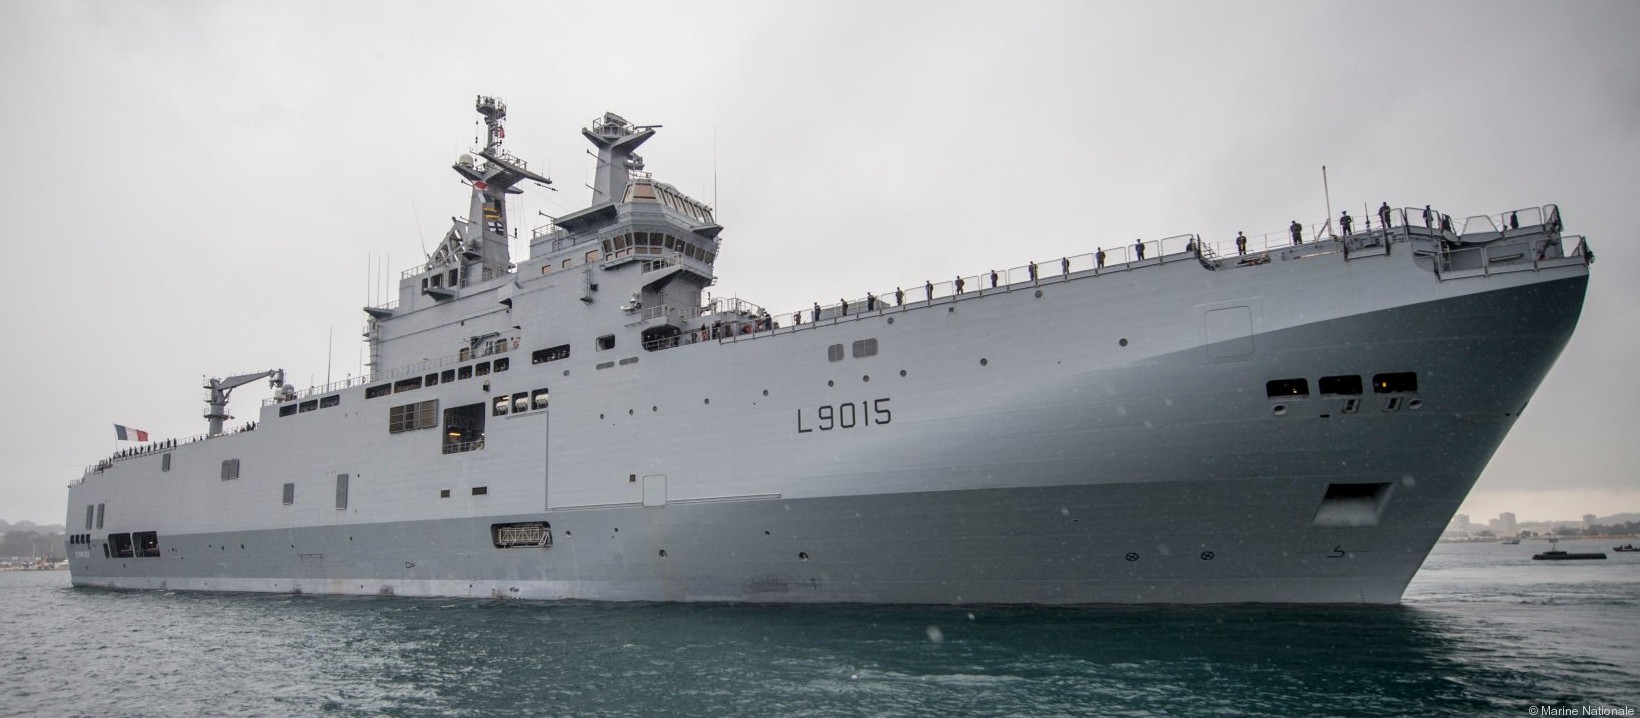 l-9015 fs dixmude mistral class amphibious assault command ship bpc french navy marine nationale 22